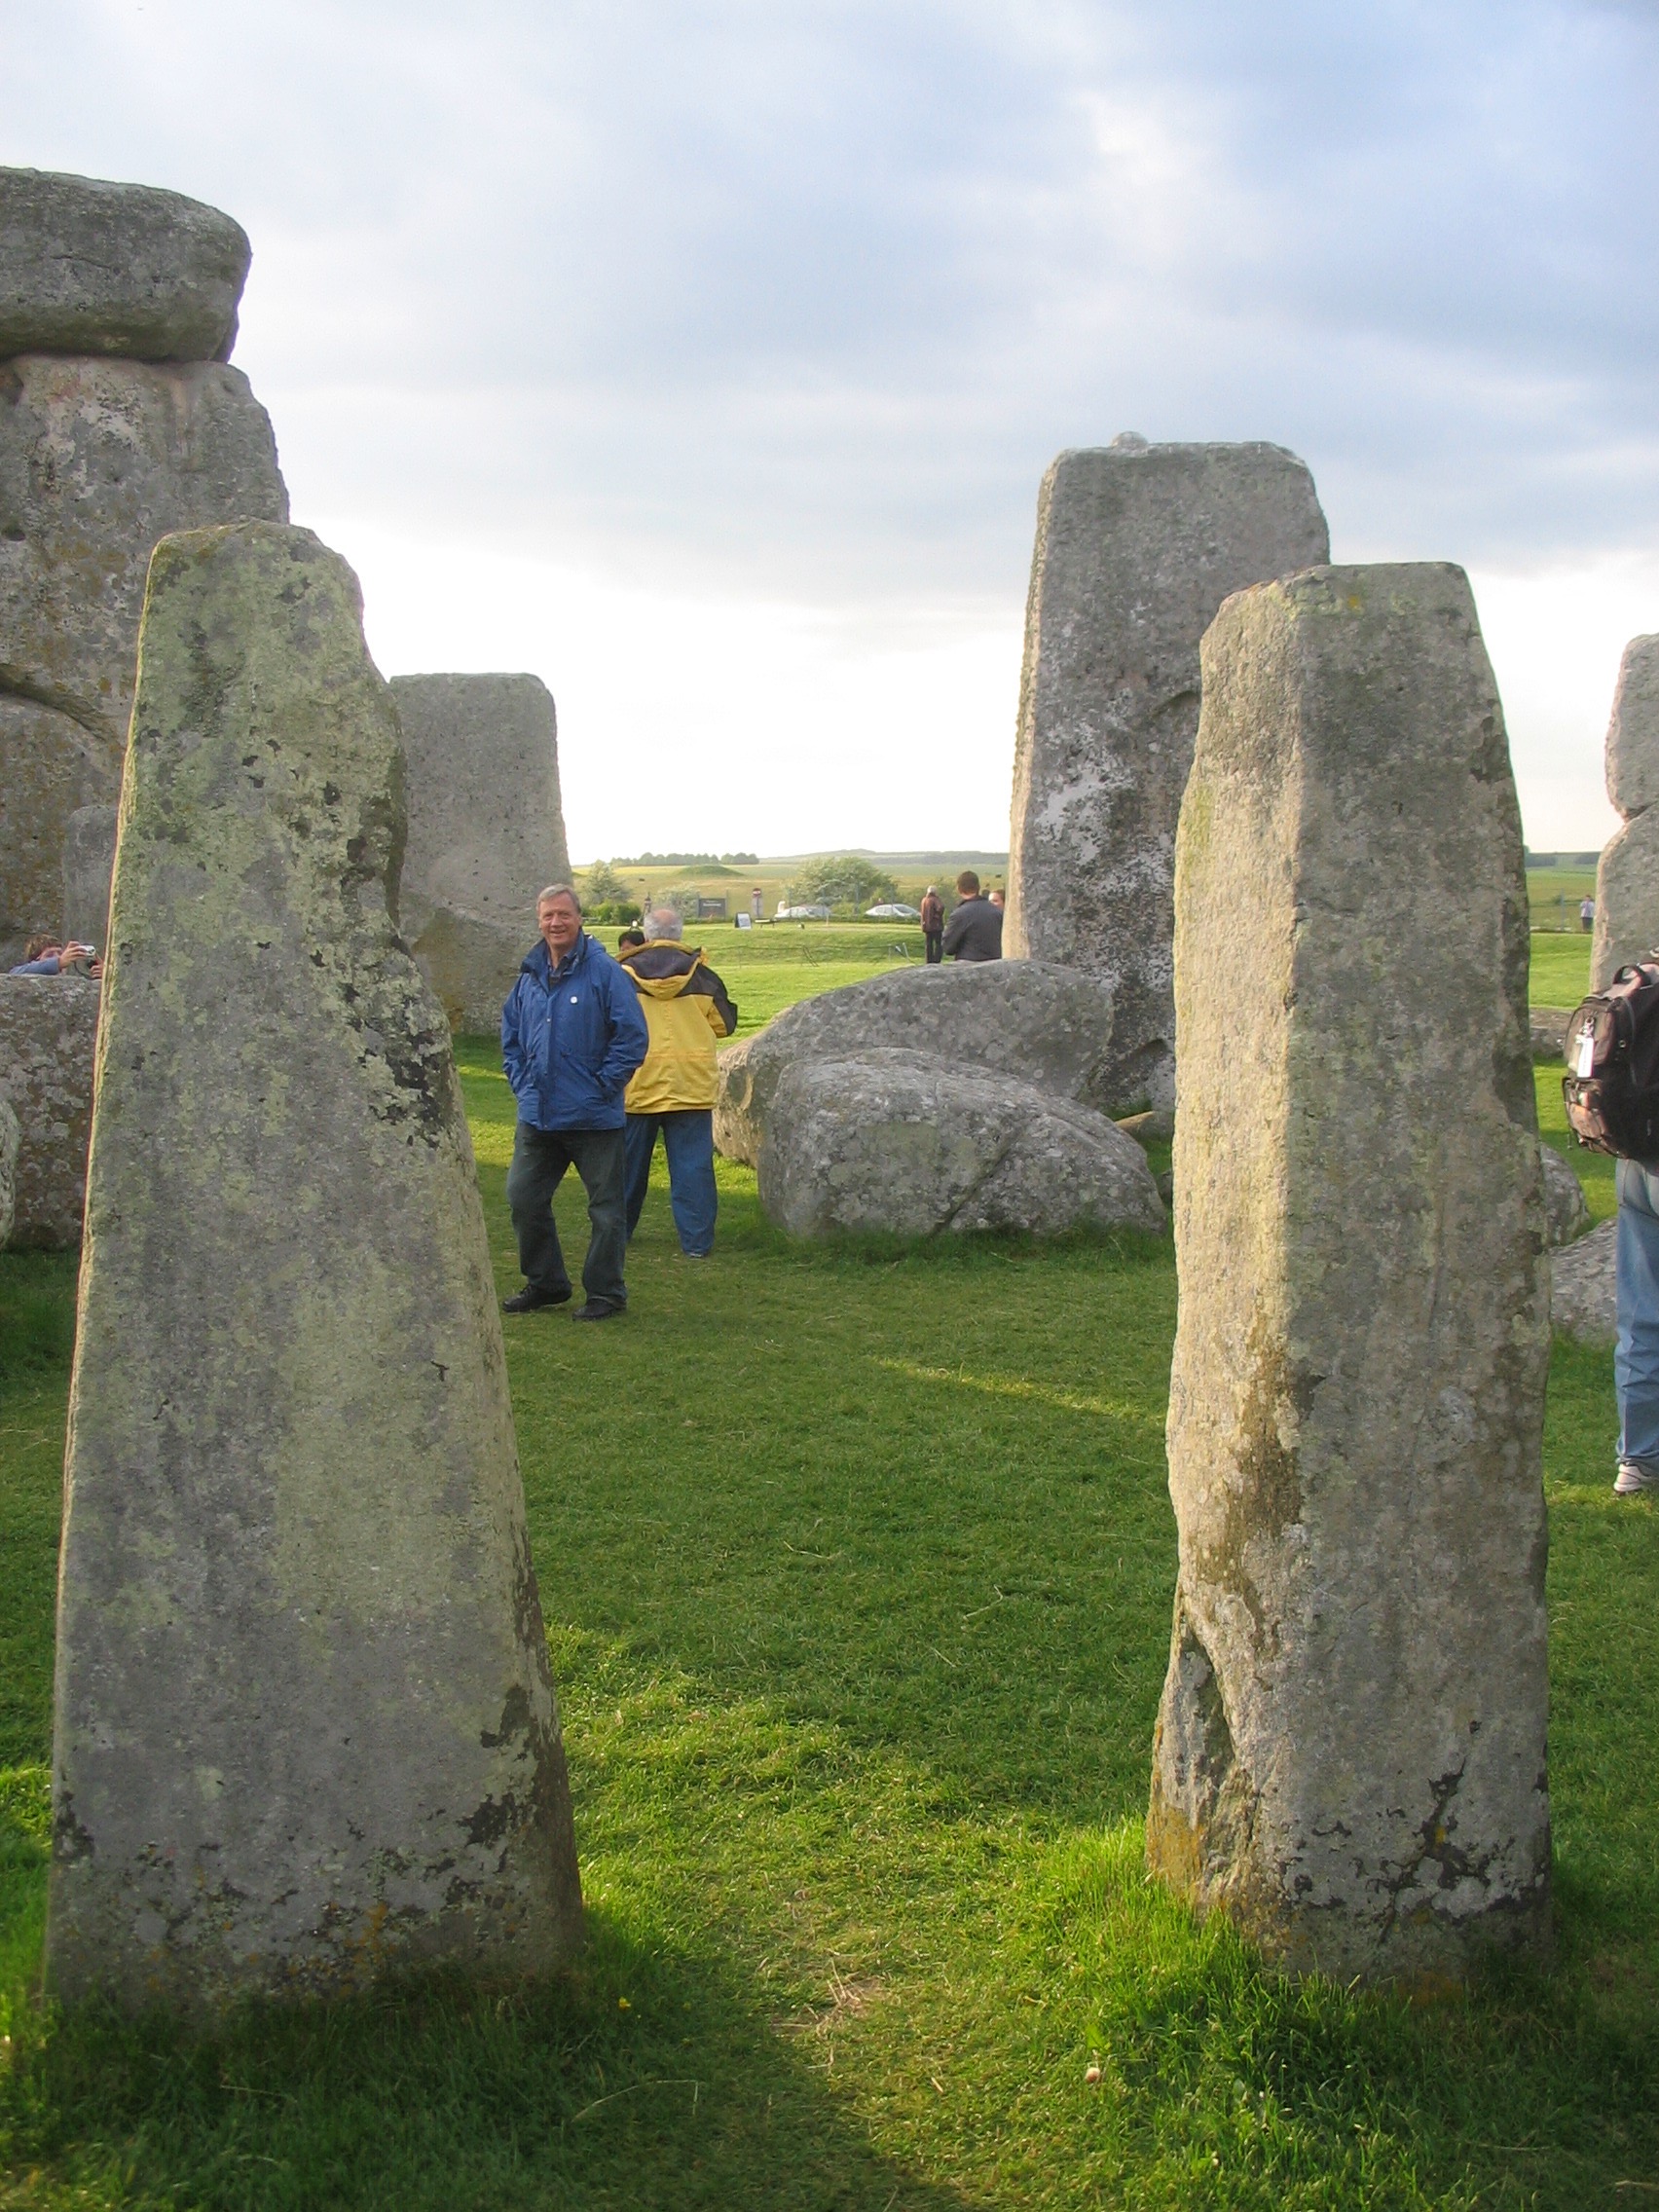 a group of people standing in a grassy area with large stones